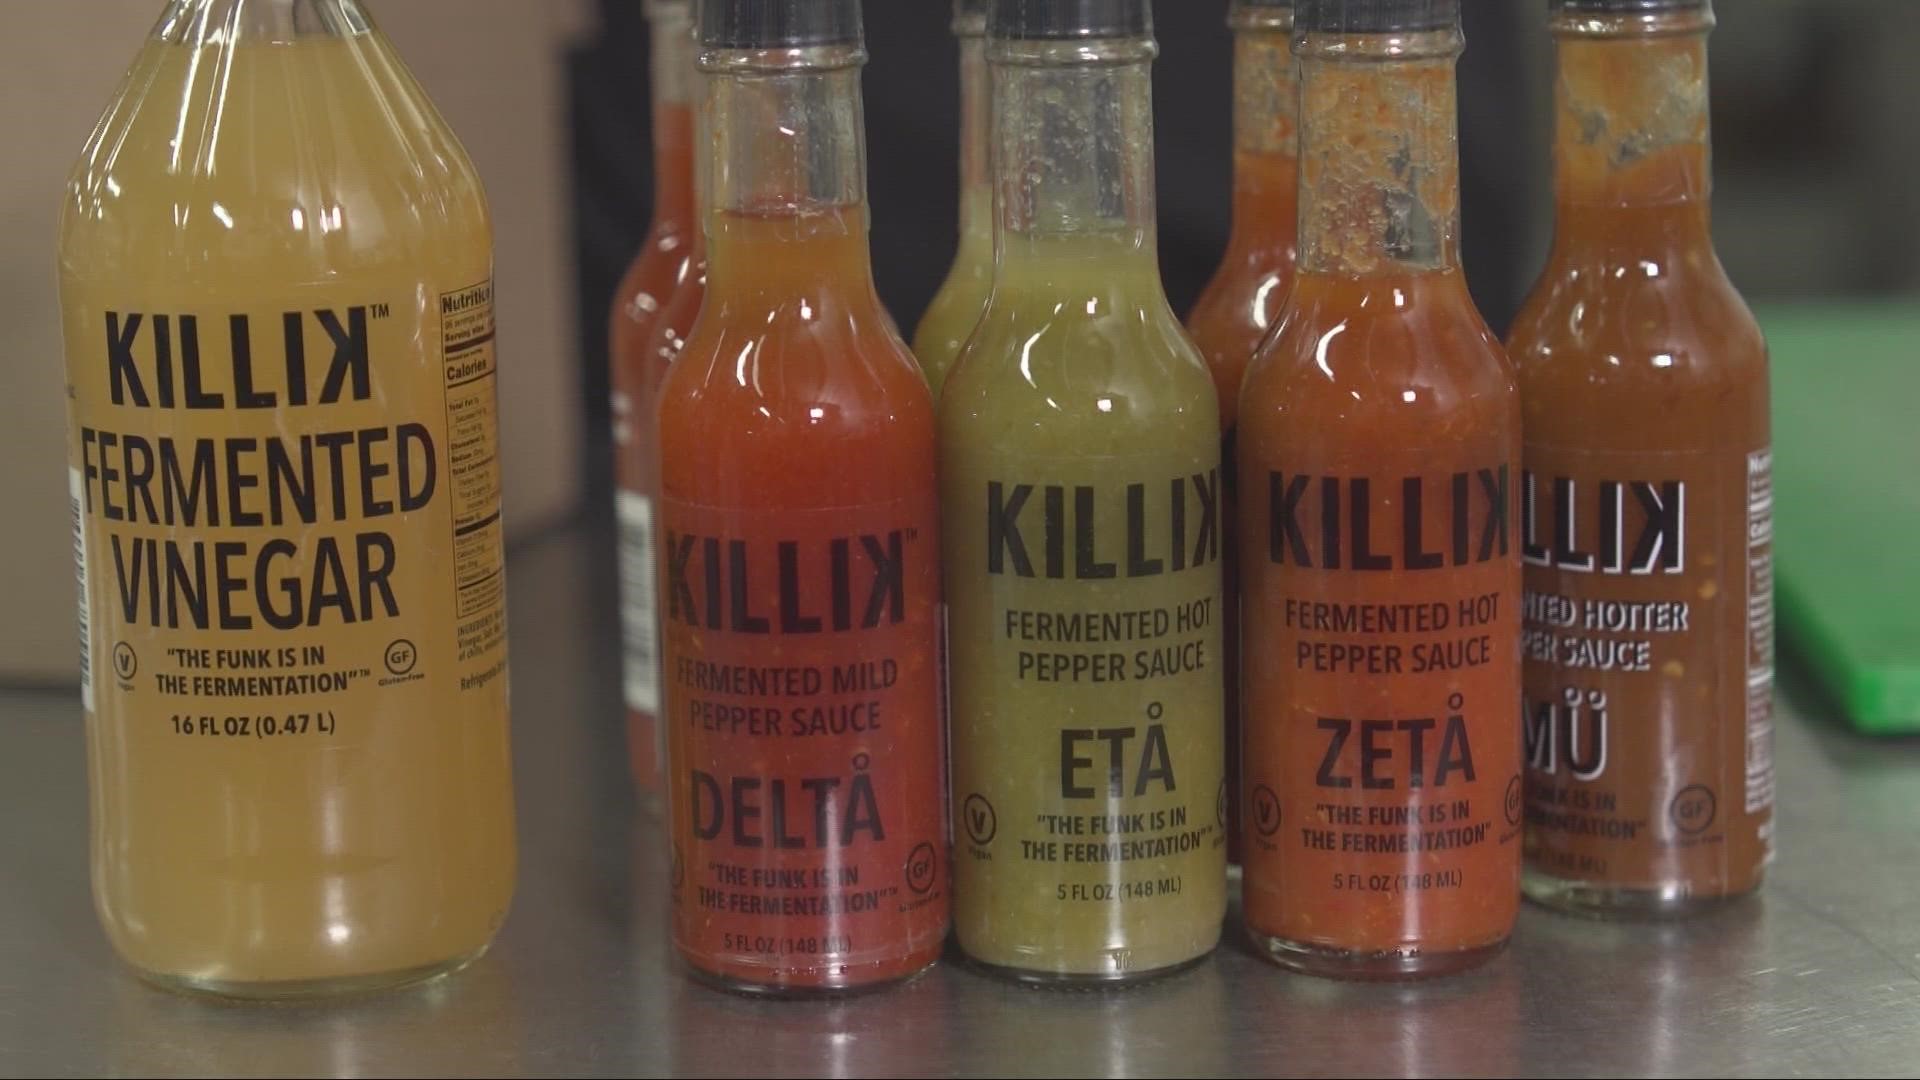 From airman, to teacher, to entrepreneur, Michael Killik has used every life chapter, including the ones he wasn’t sure he’d survive, to create a hot sauce company.